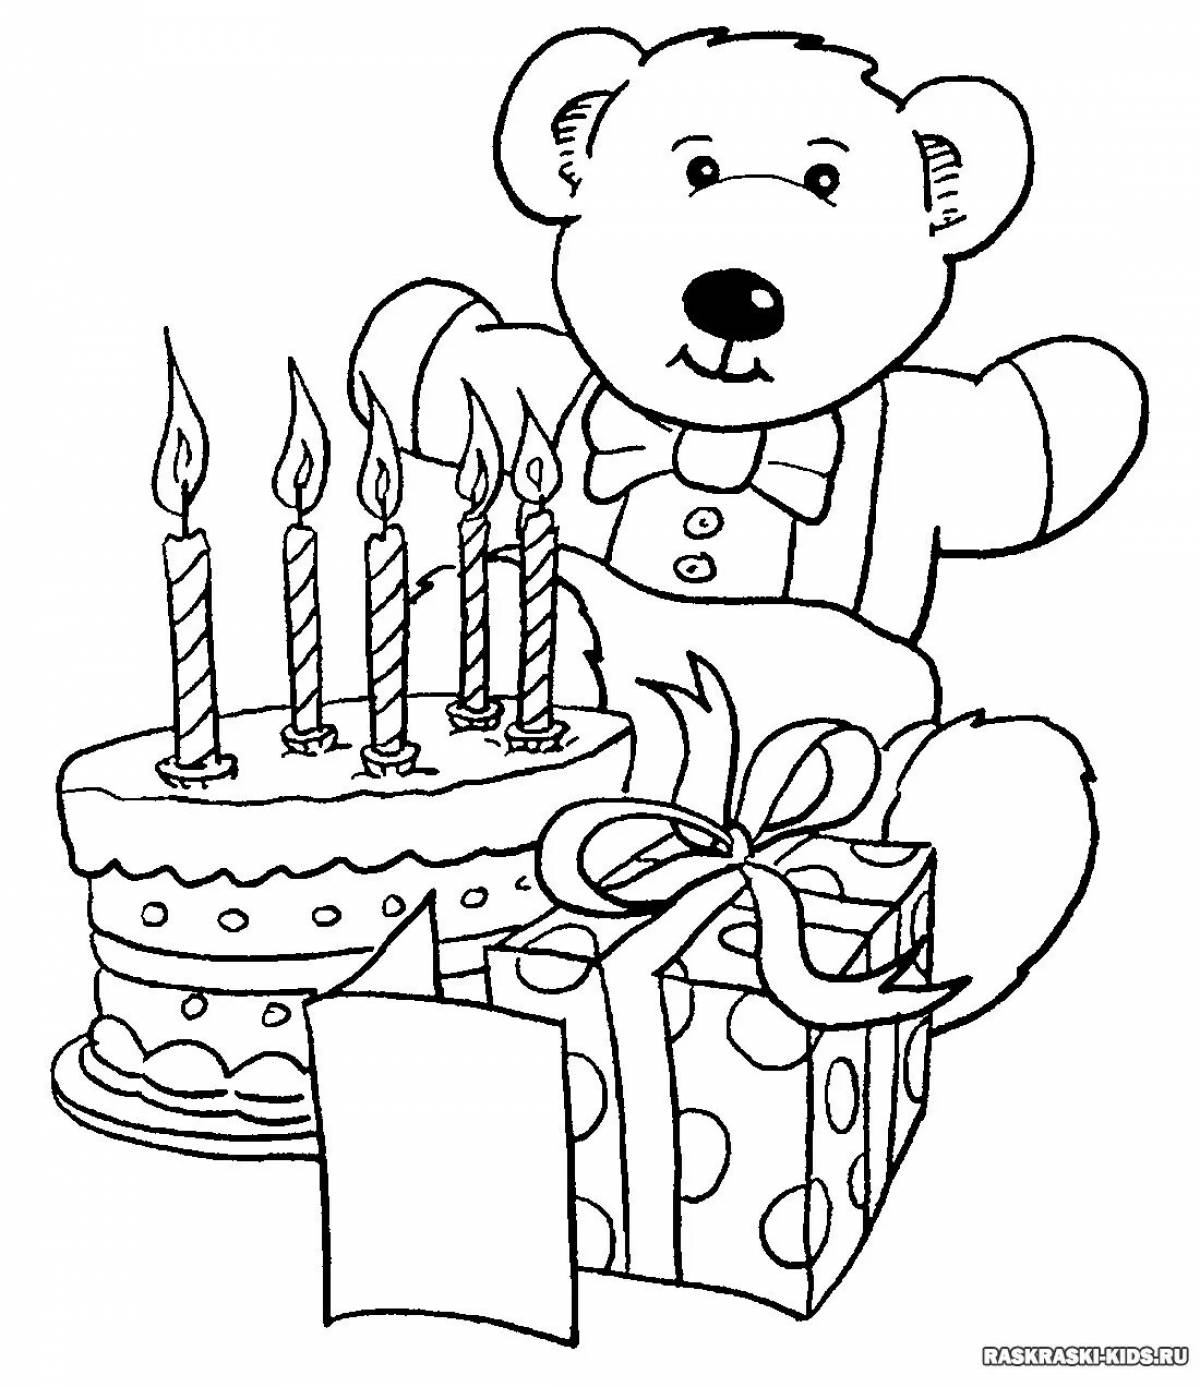 Awesome little sister's birthday coloring page